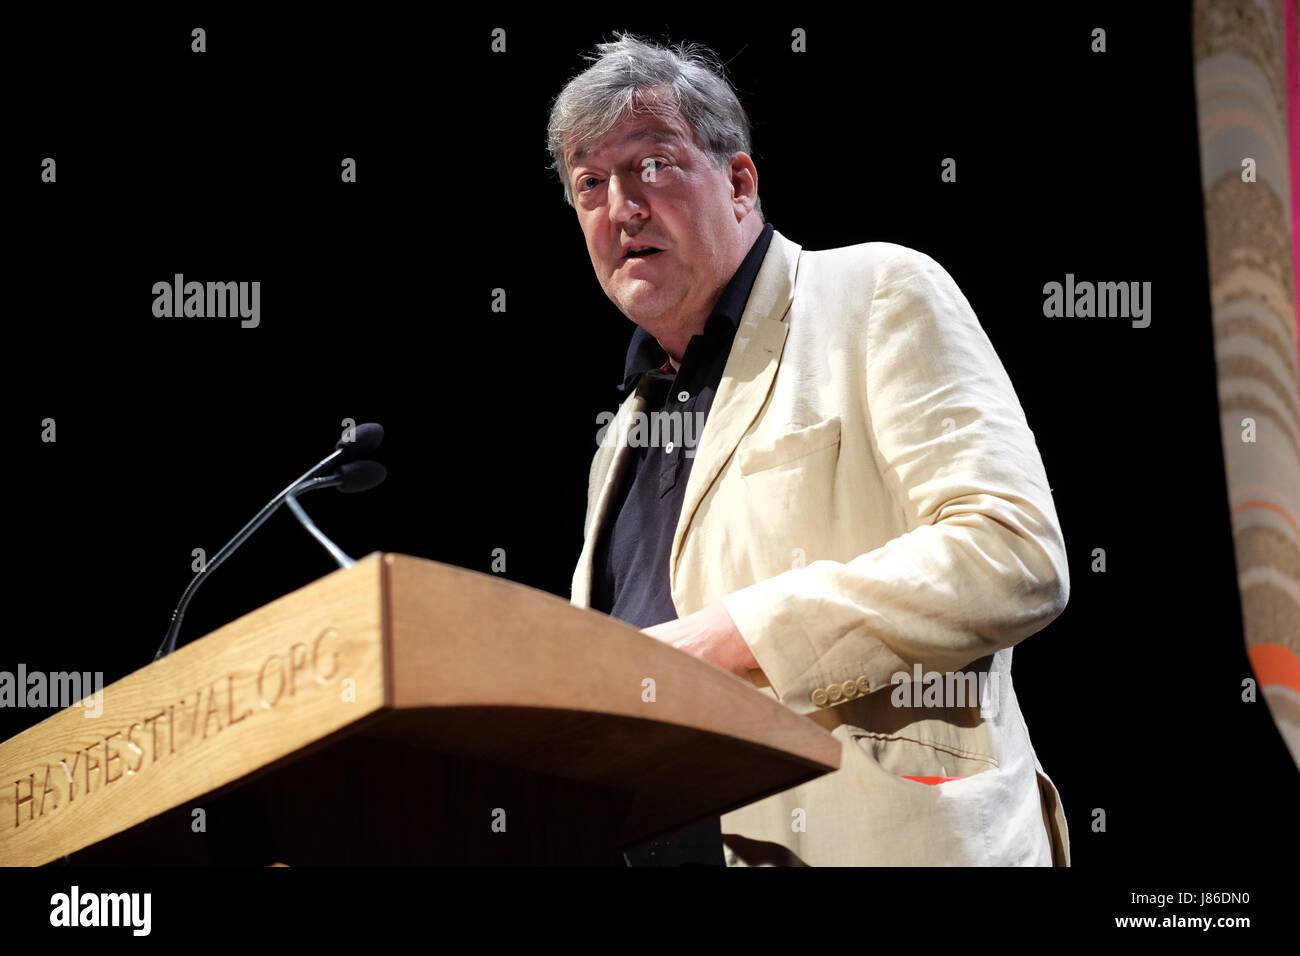 Hay Festival 2017 - Hay on Wye, Wales, UK - Saturday 27th May 2017 - Stephen Fry reads the first letter to start this years Letters Live performance at the Hay Festival - the Hay Festival celebrates its 30th anniversary in 2017 - Steven May / Alamy Live News Stock Photo